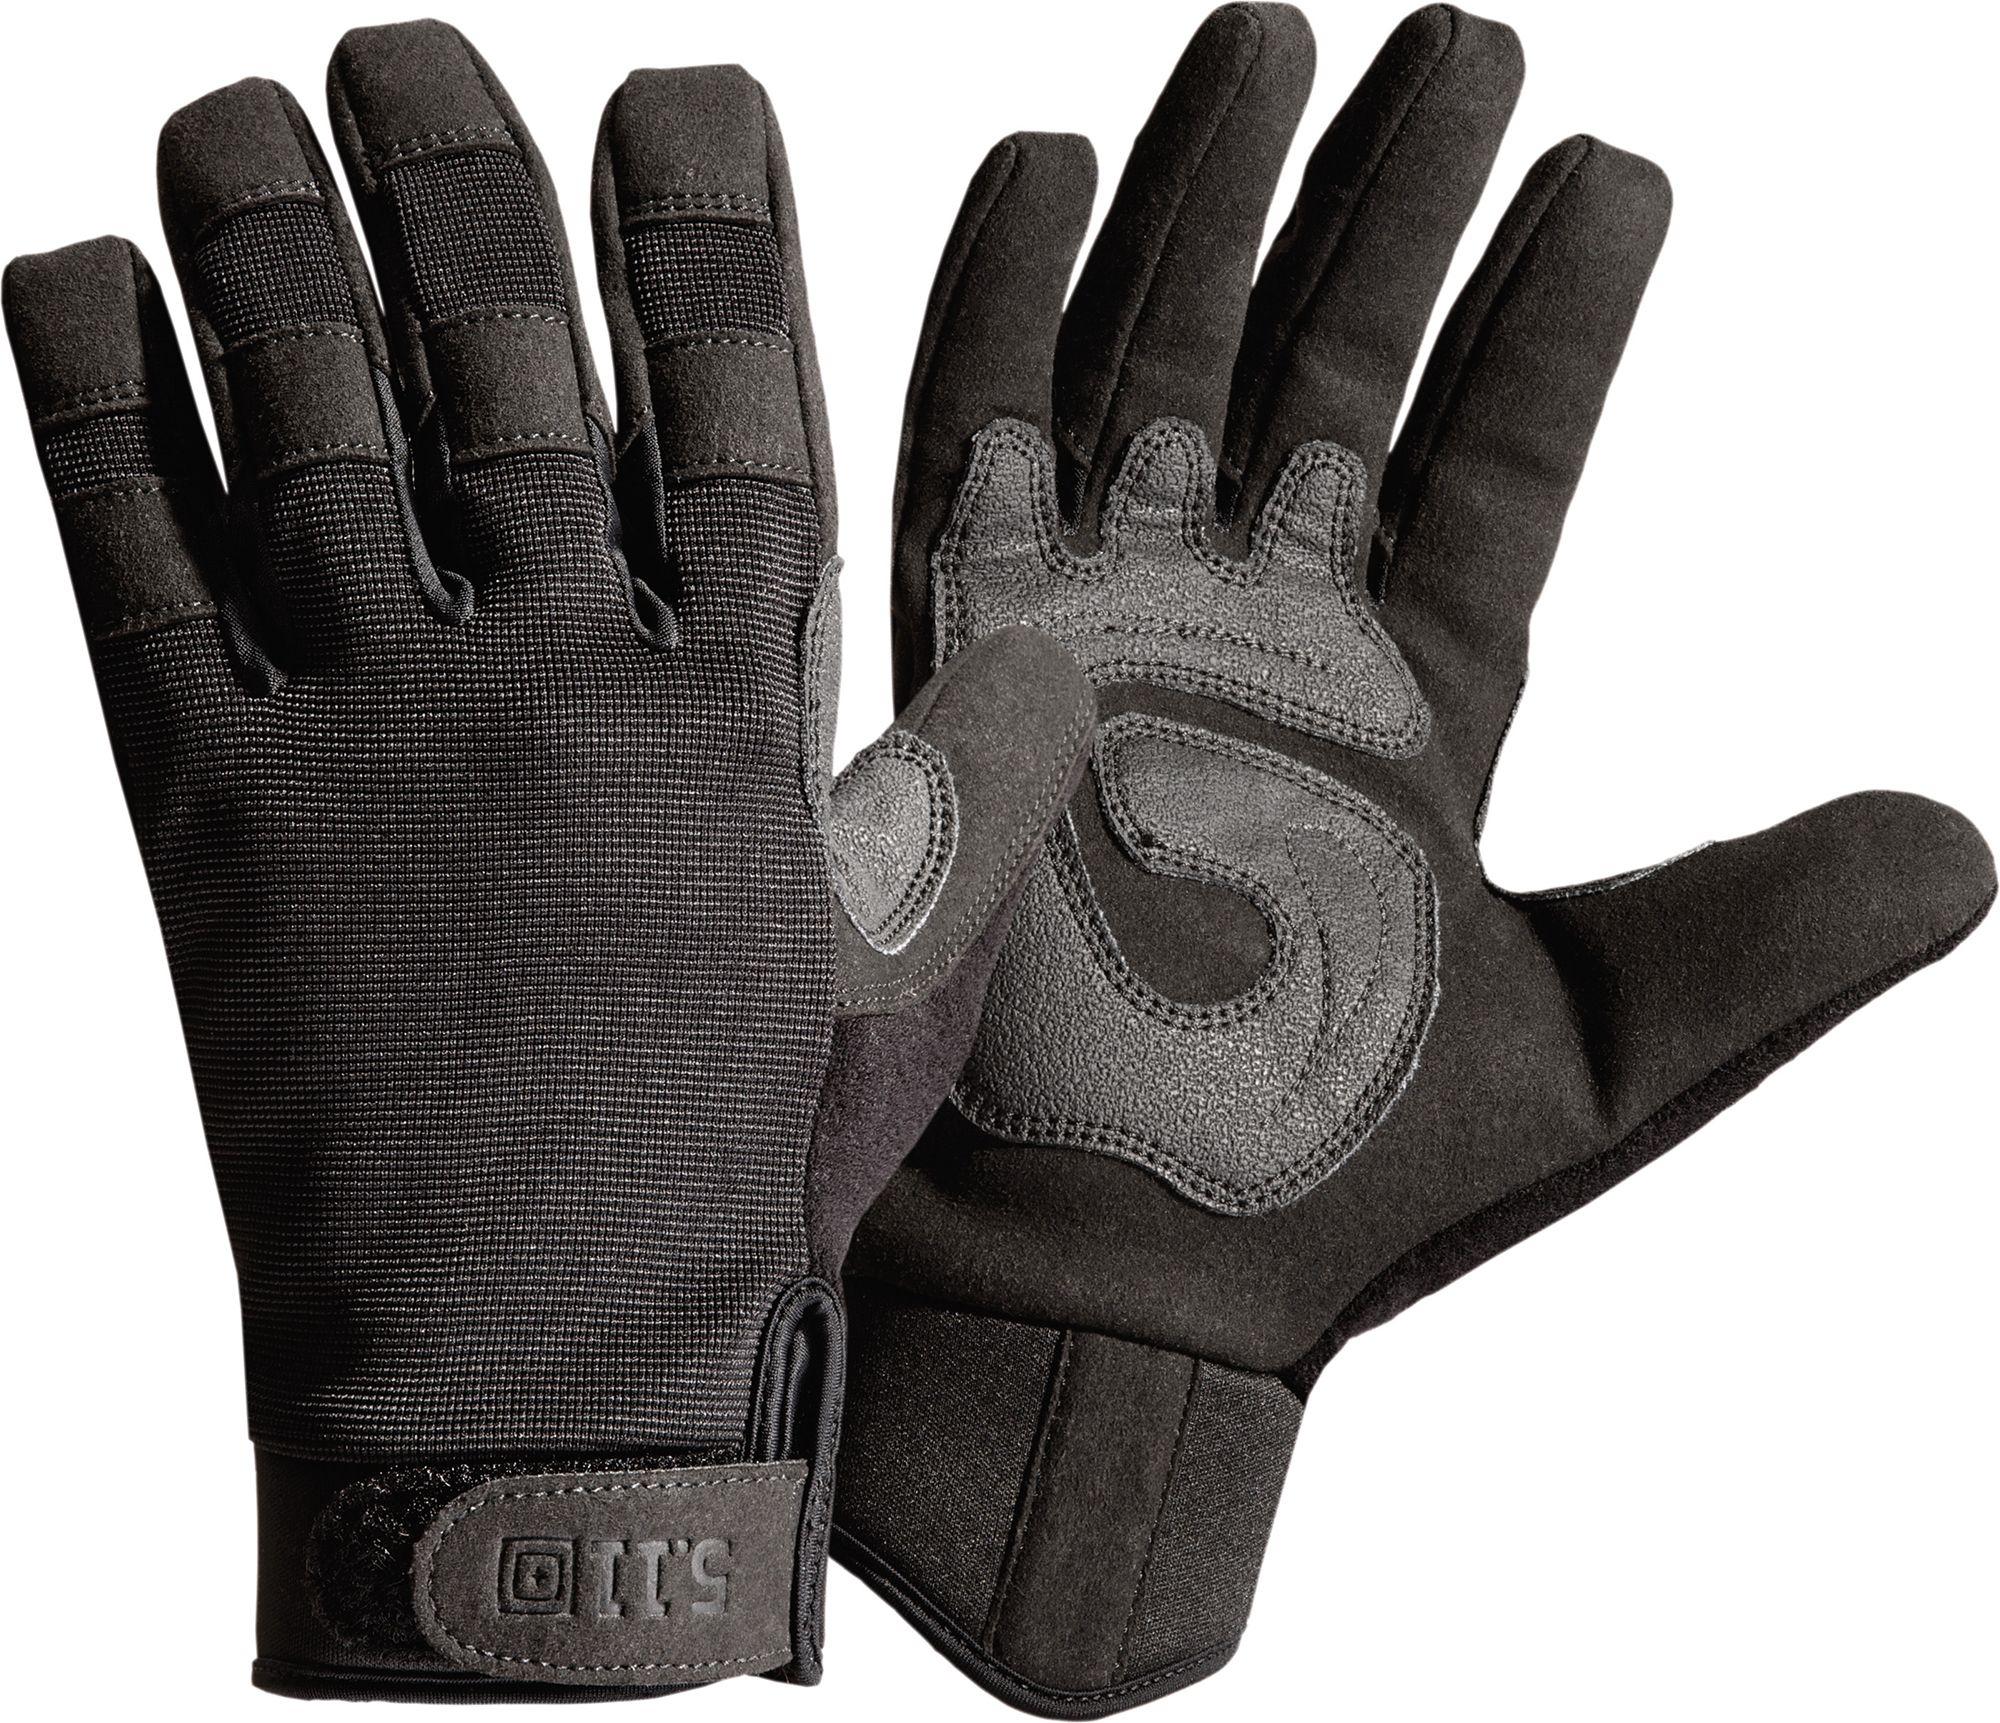 nike tactical gloves